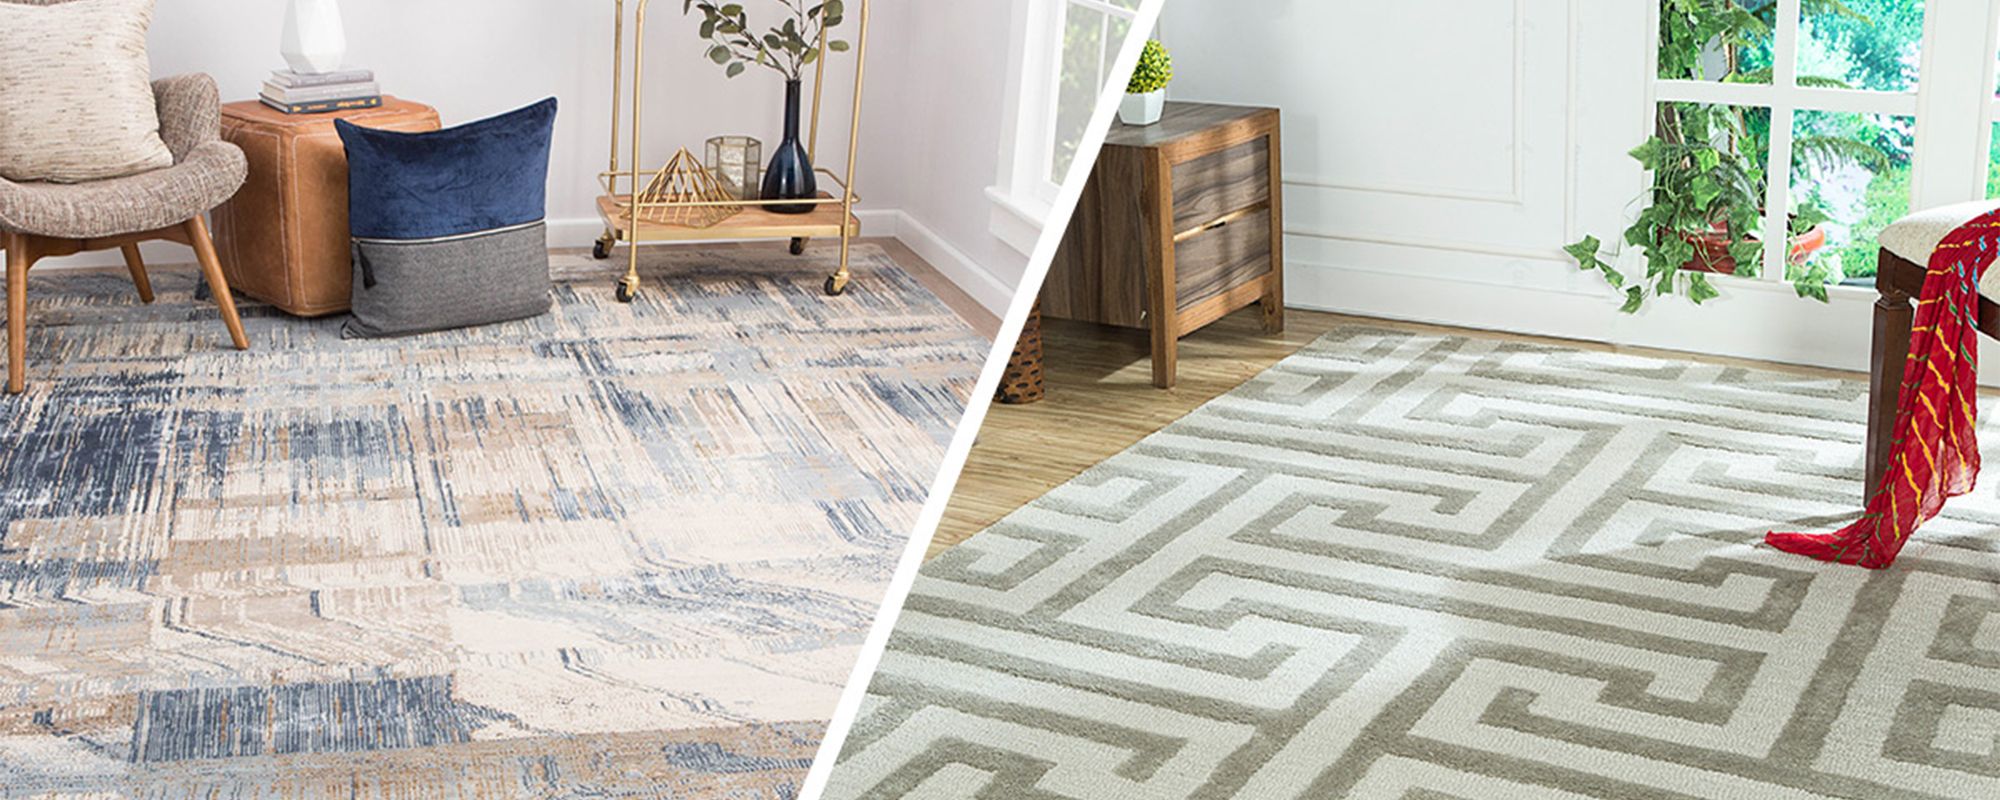 Types Of Rugs To Know Before You Shop Hand Tufted Rugs Vs Hand Knotted Rugs Within Hand Knotted Rugs (View 7 of 15)